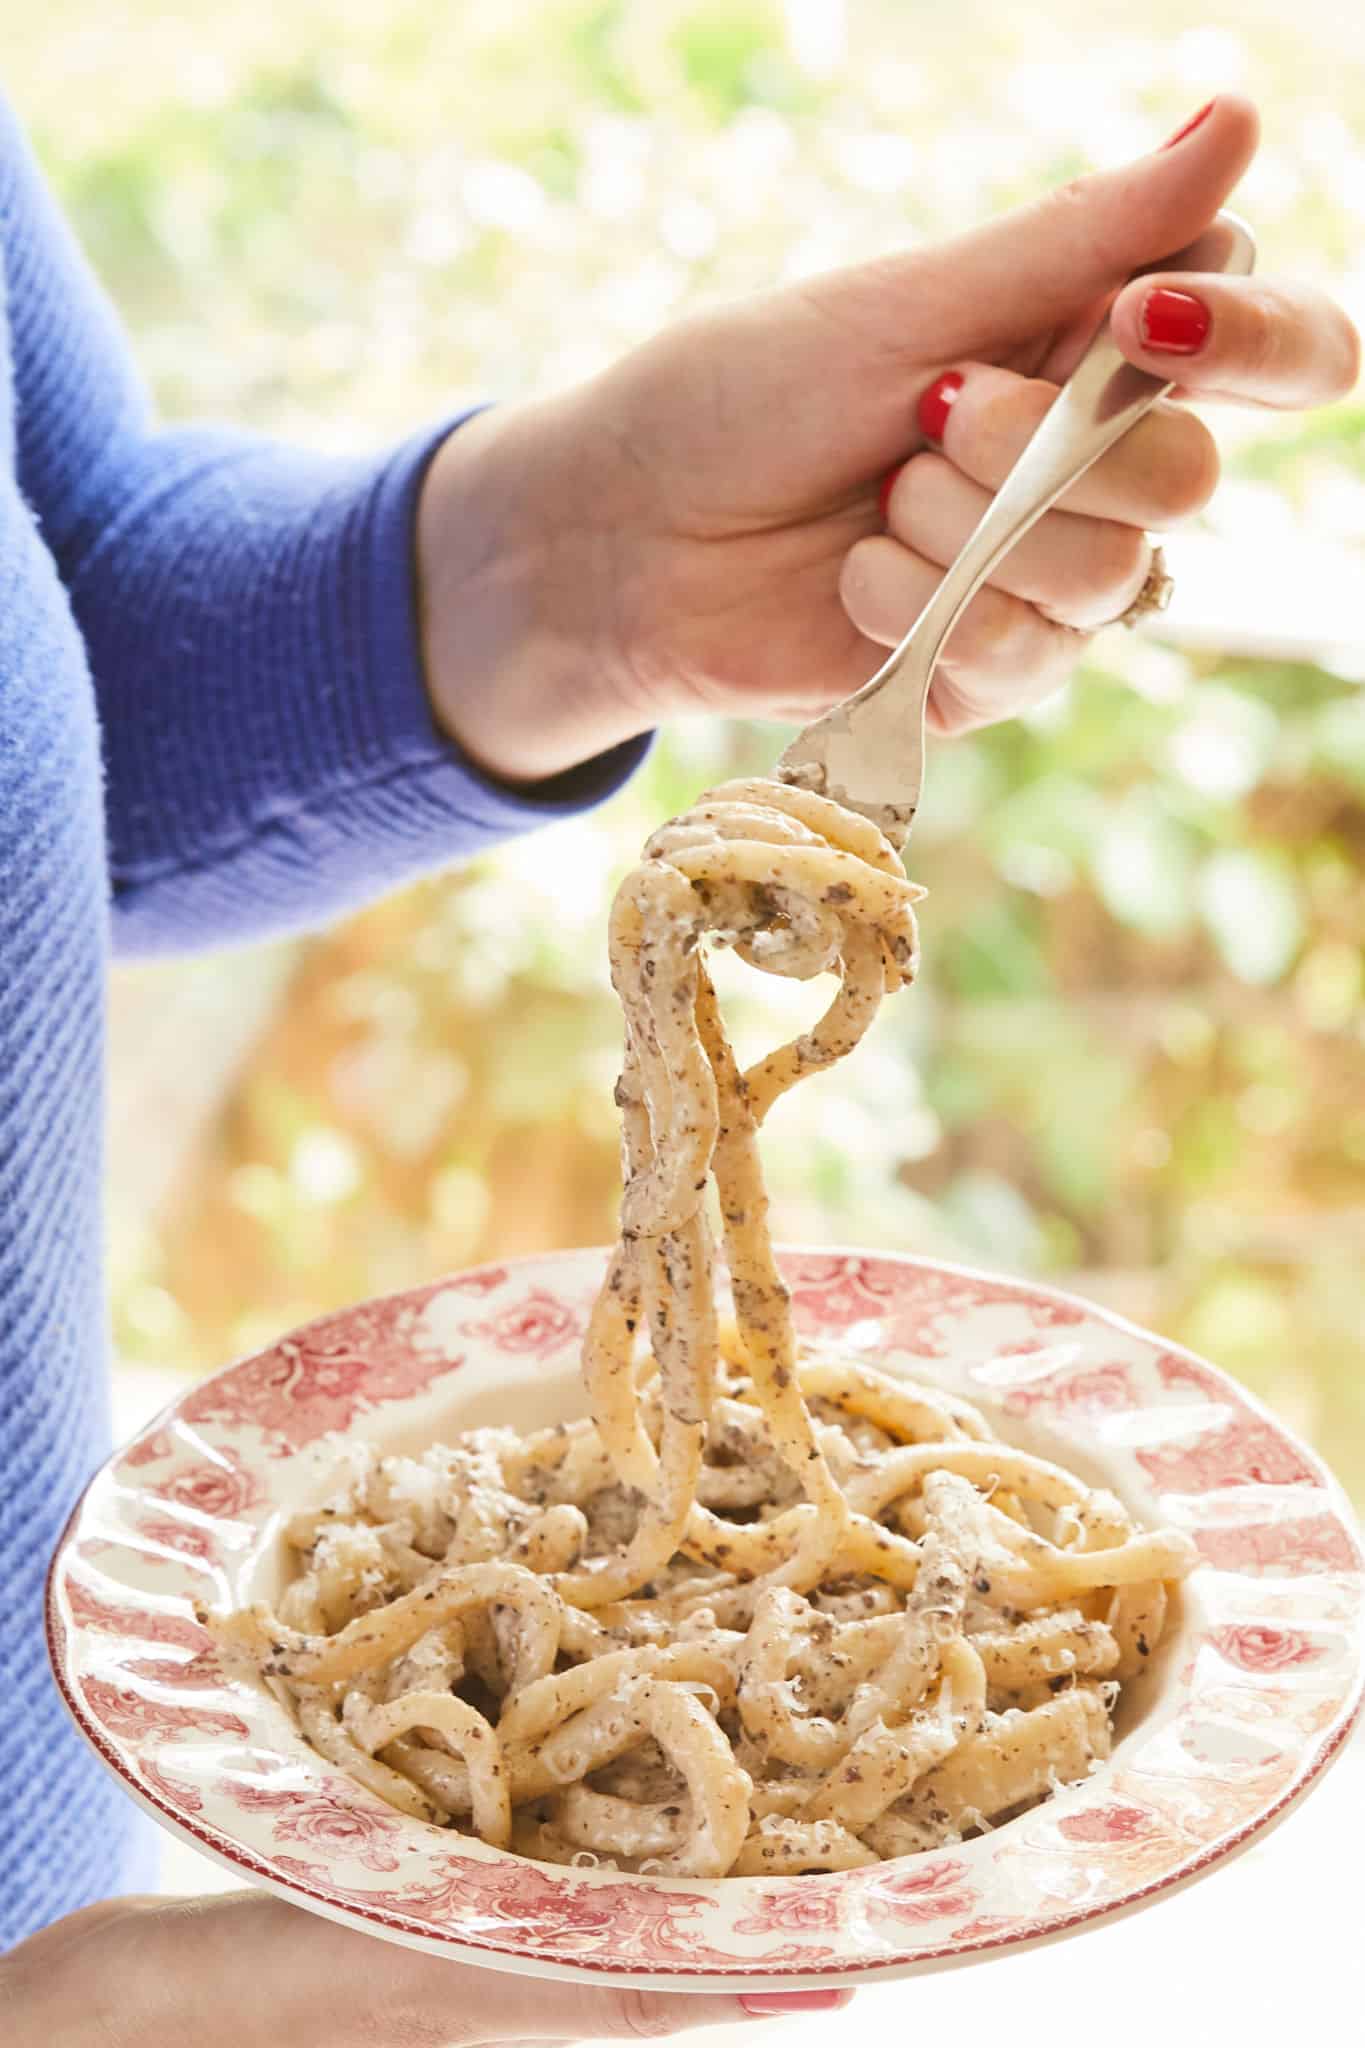 A hand holding a forkful of pici pasta with sauce.